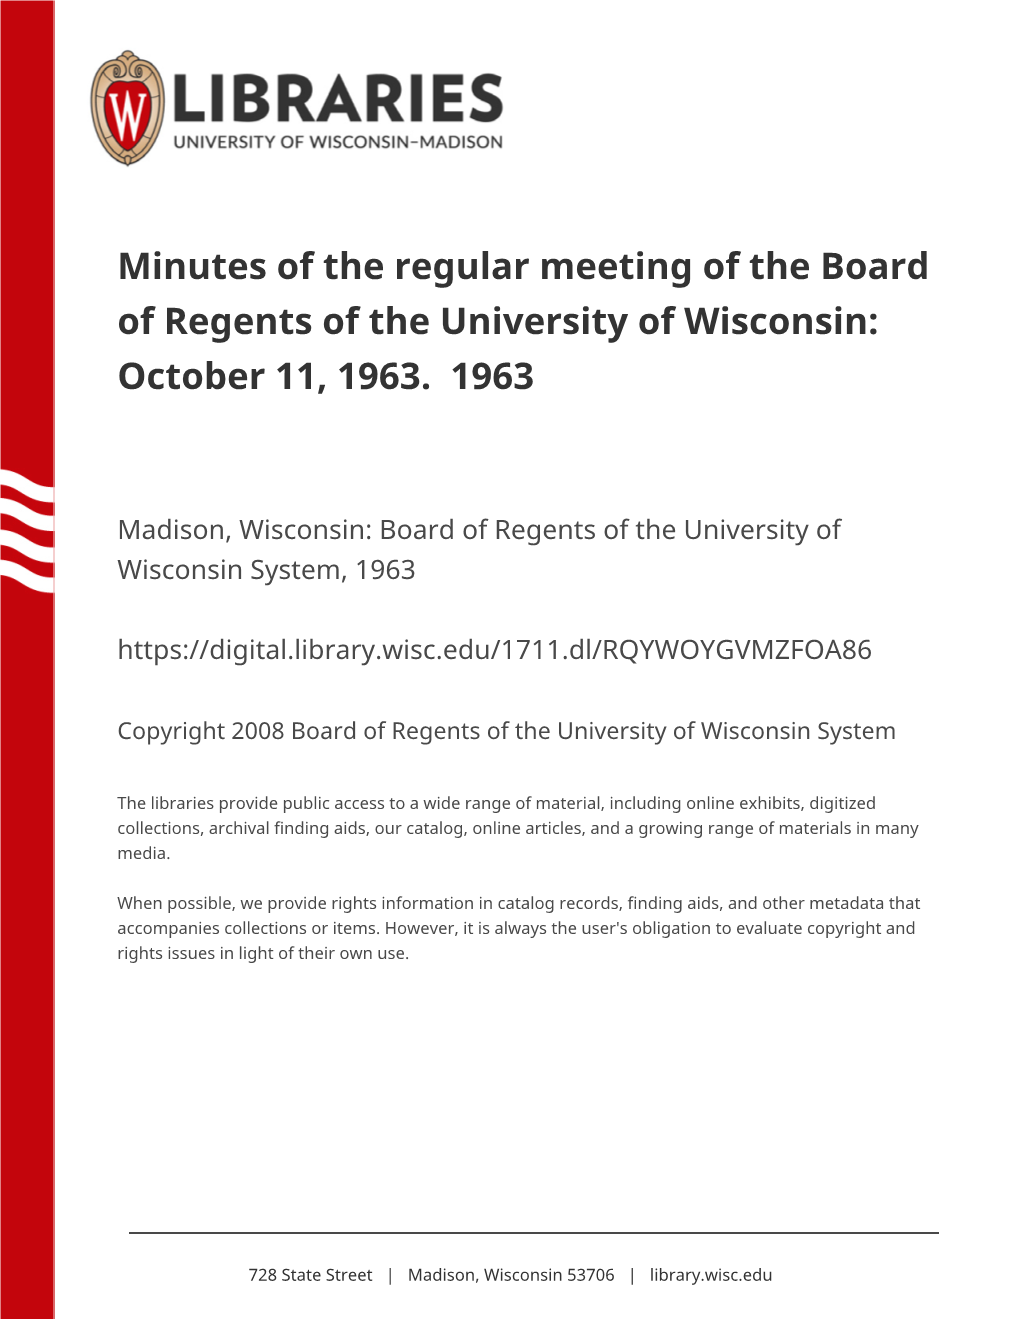 Minutes of the Regular Meeting of the Board of Regents of the University of Wisconsin: October 11, 1963